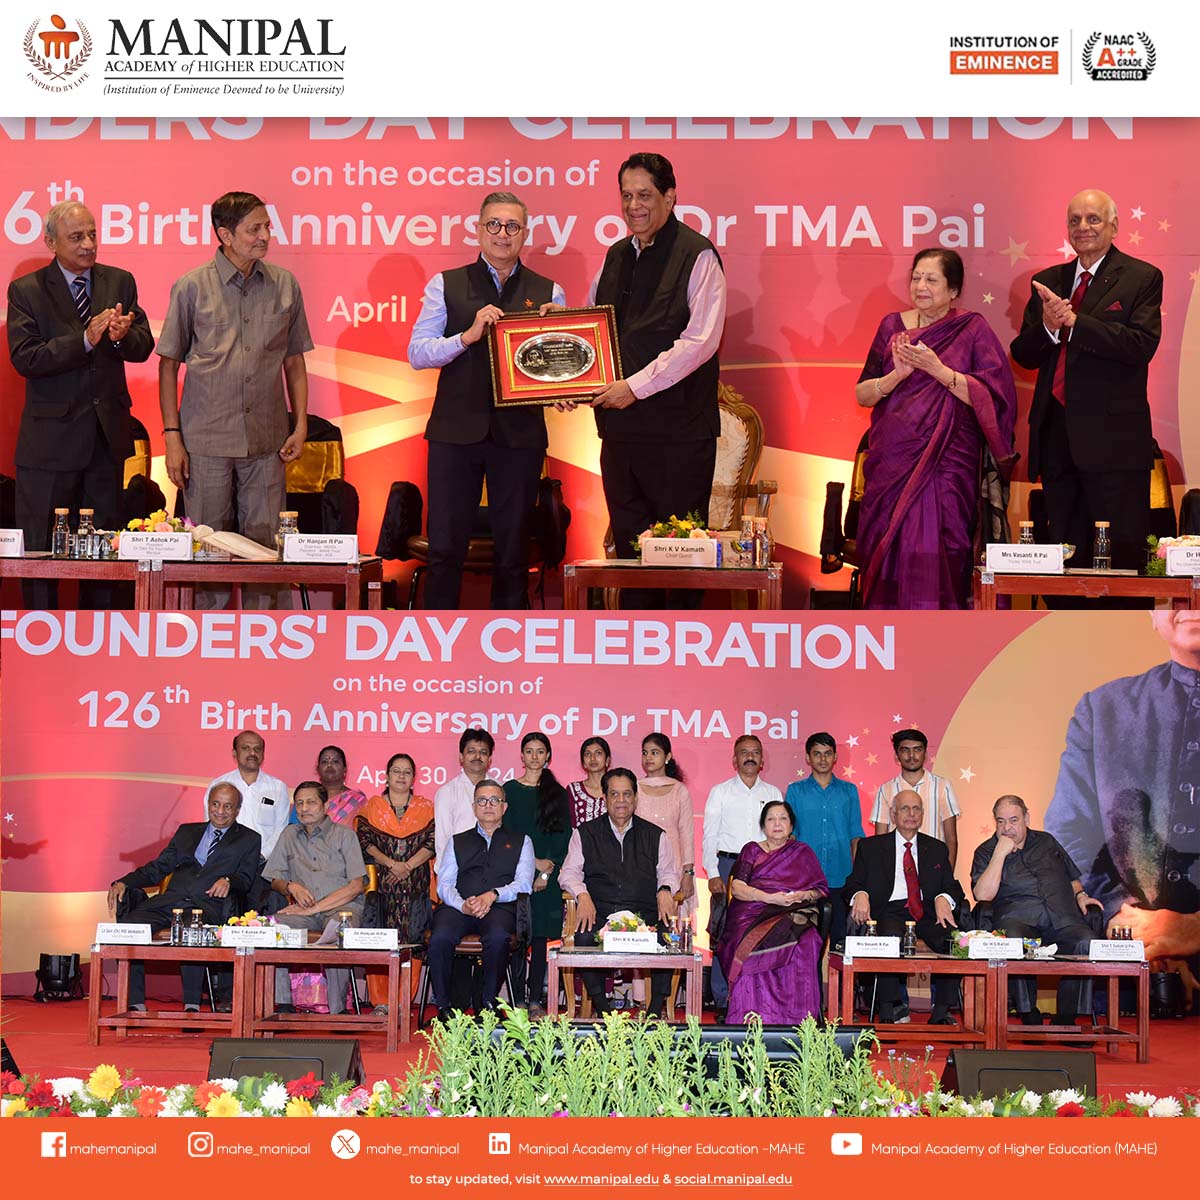 Manipal Academy of Higher Education (MAHE) celebrates Founder's Day to mark the 126th birth anniversary of Dr. TMA Pai.
#mahe #mahemanipal #foundersday